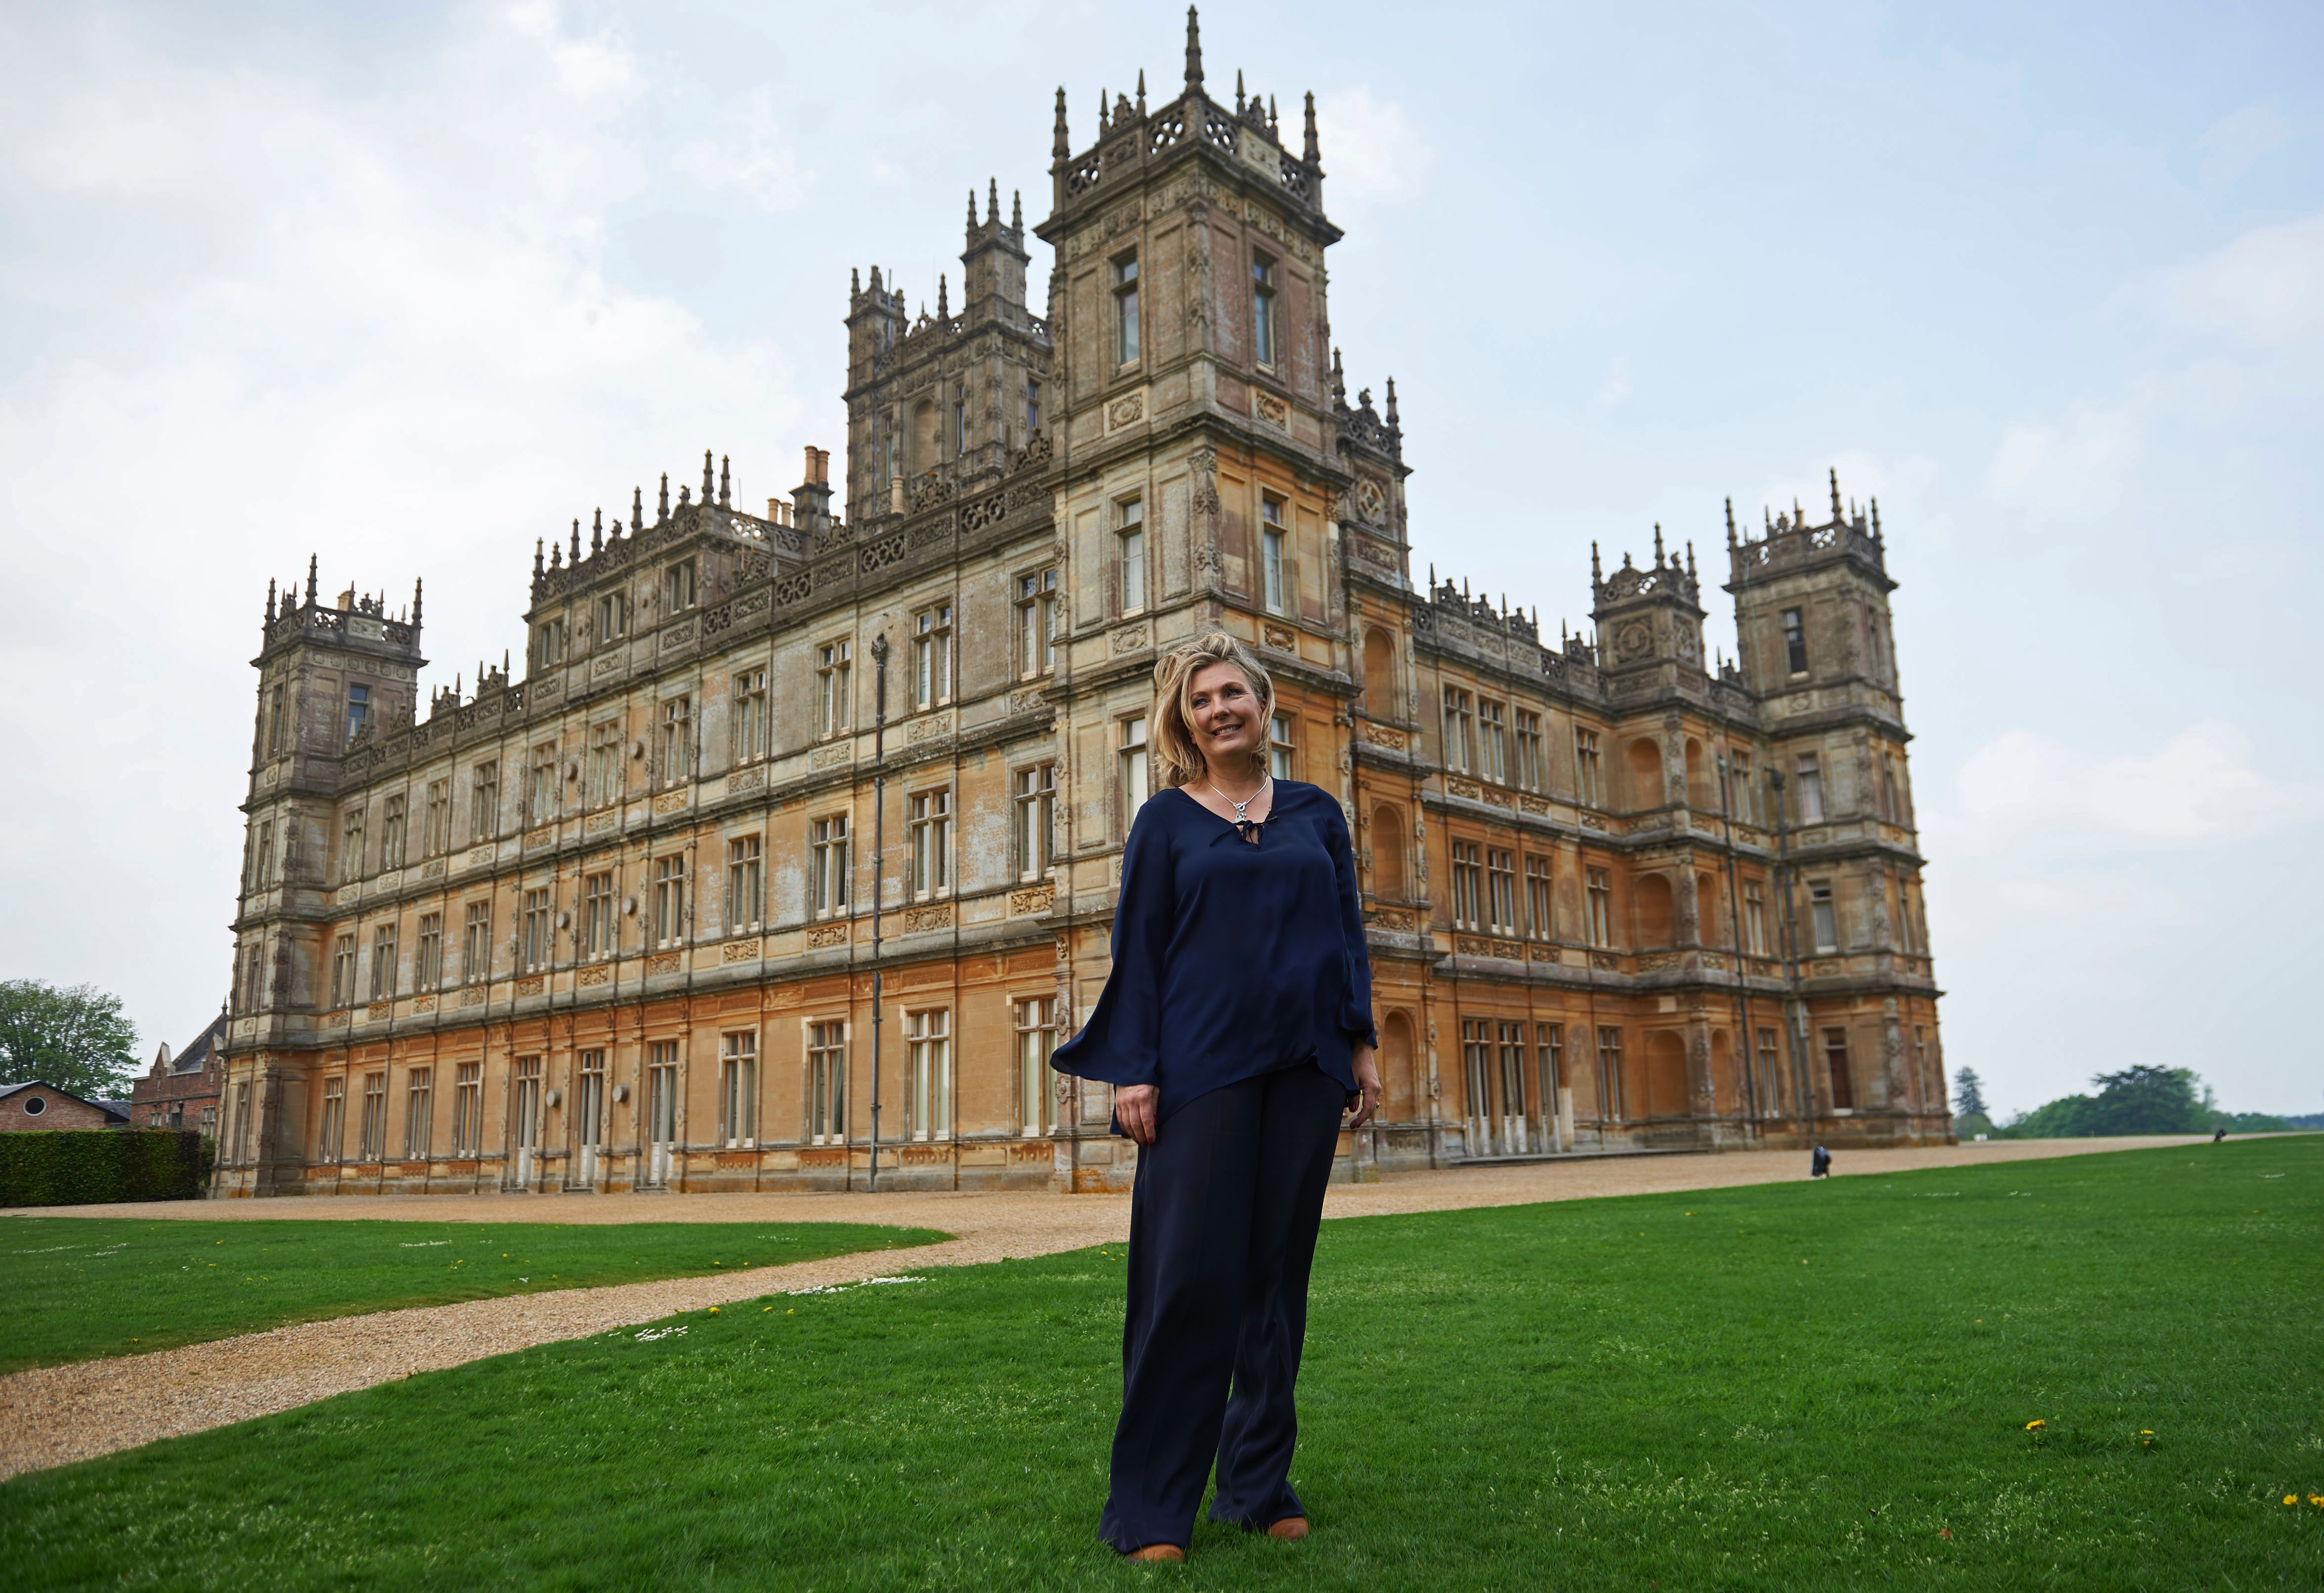 Lady Fiona Carnarvon is the owner of Highclere Castle